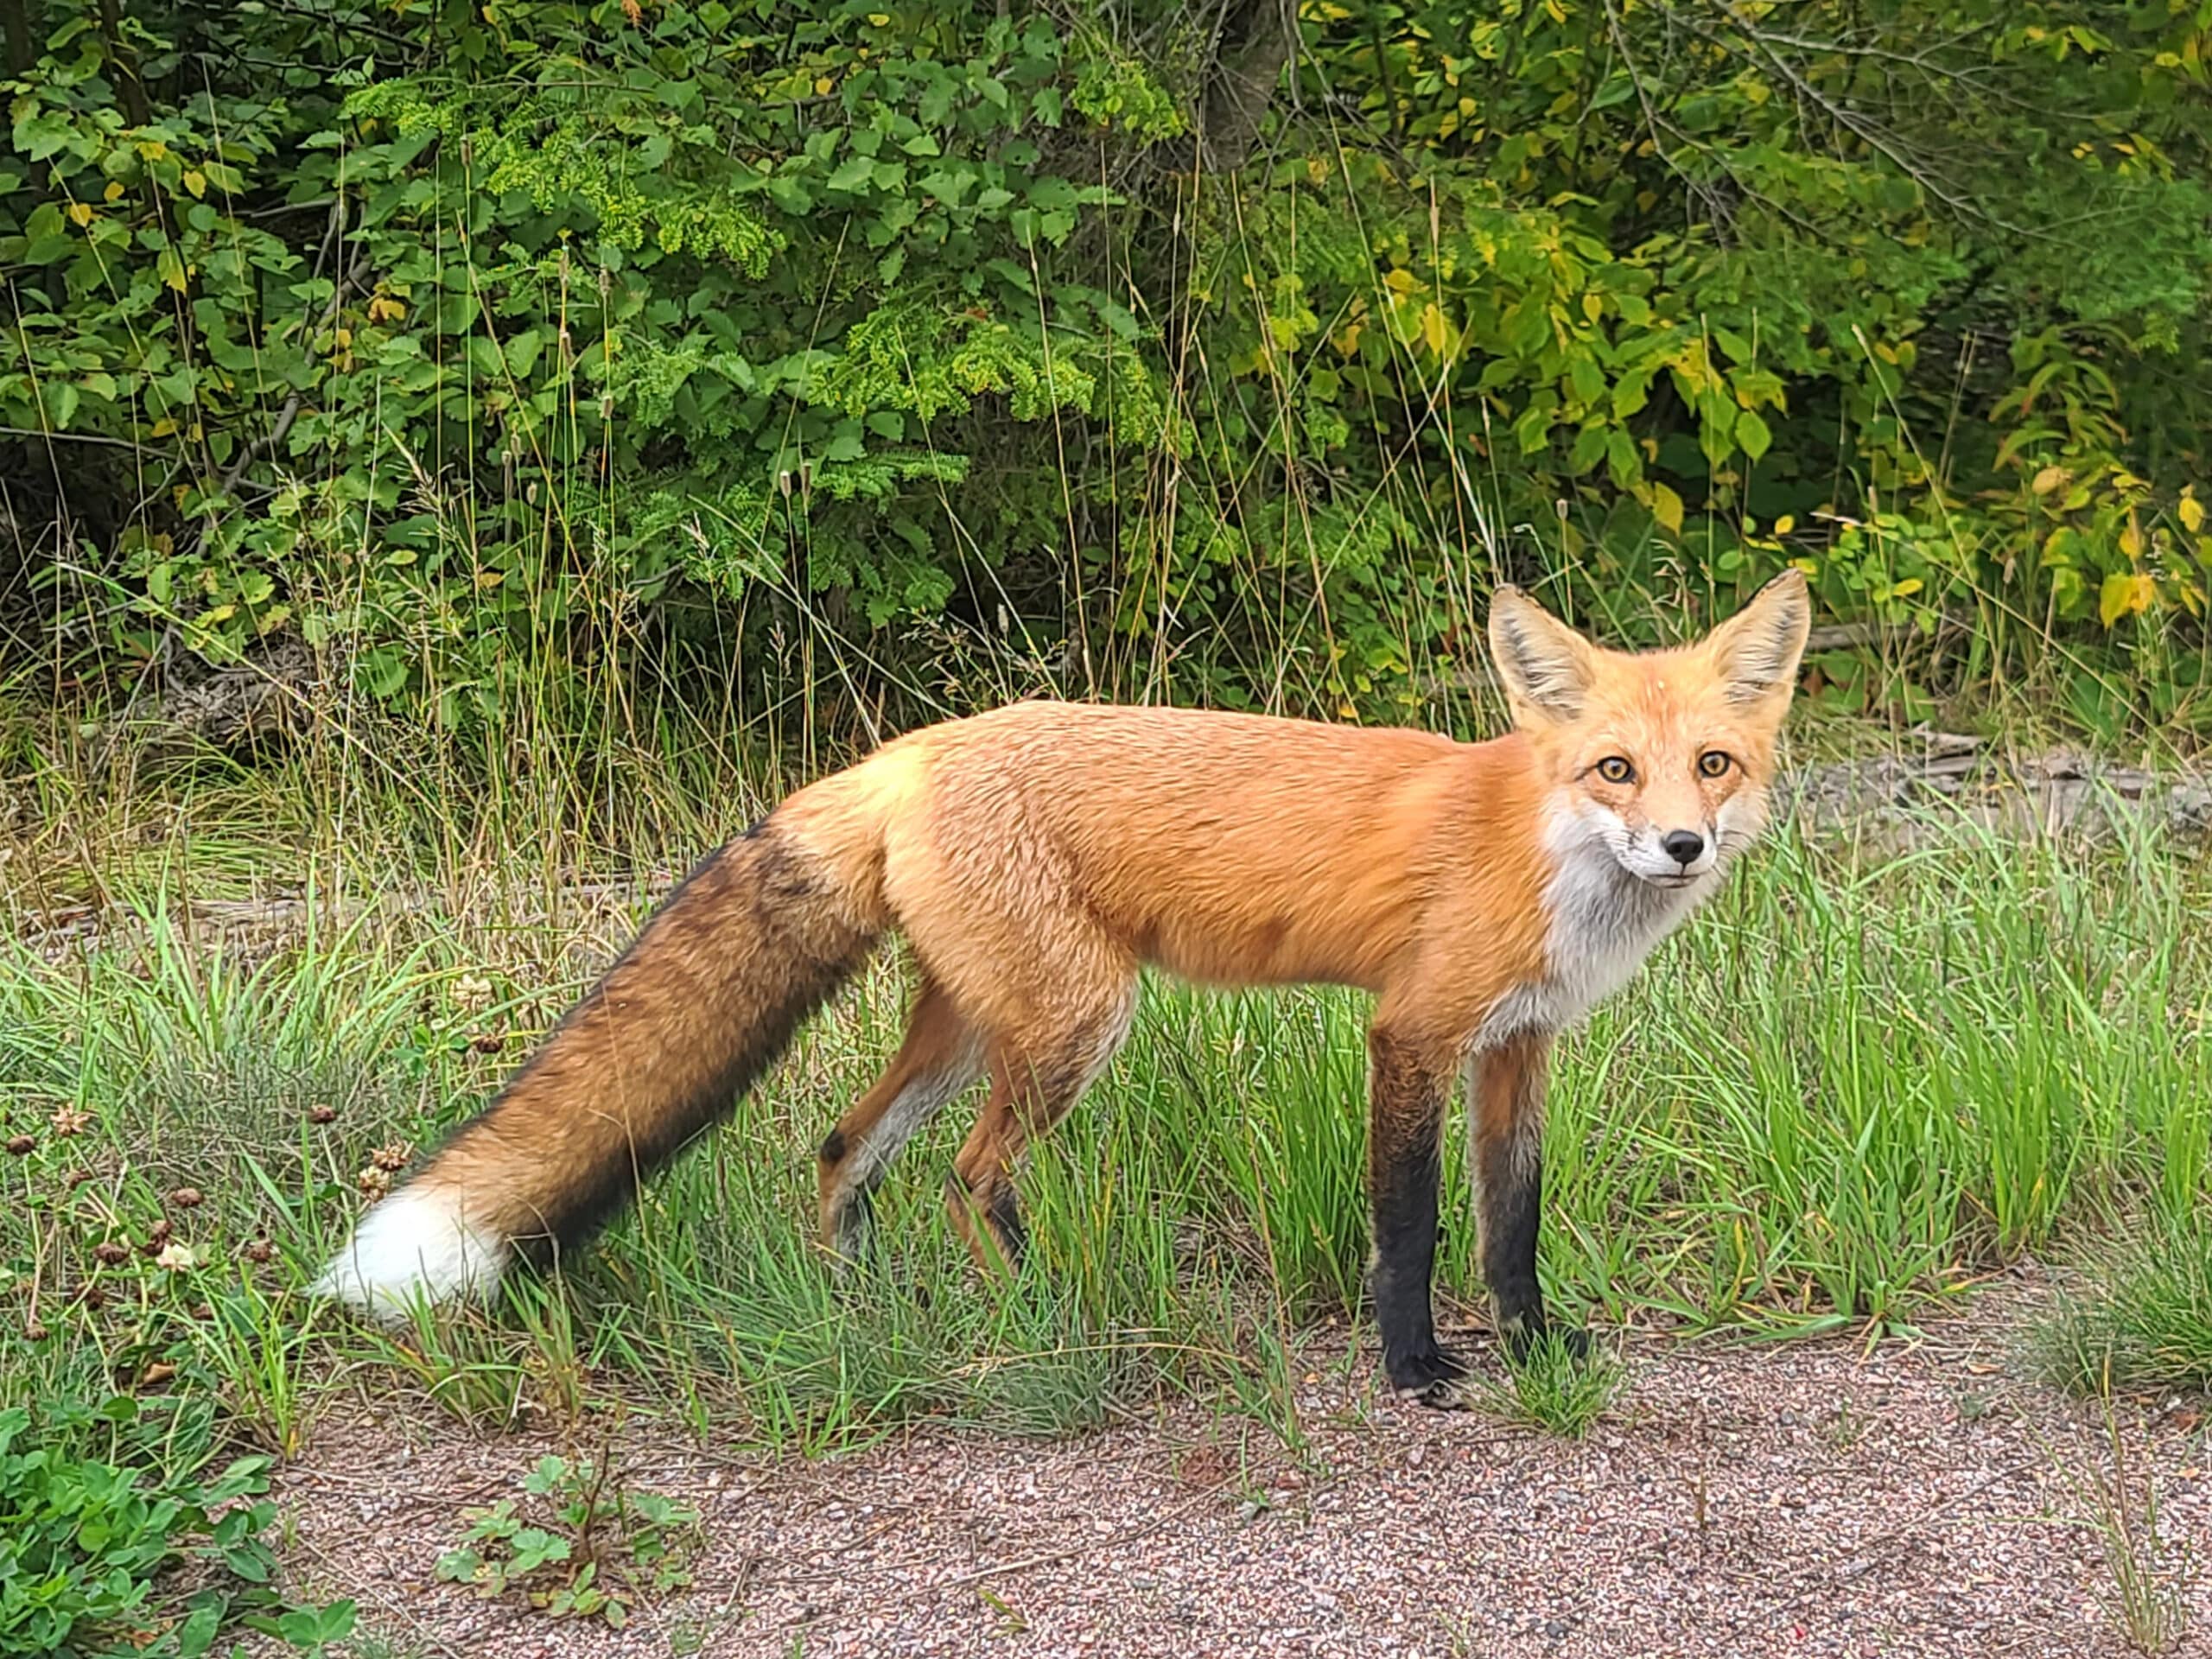 A red fox on the side of a road.